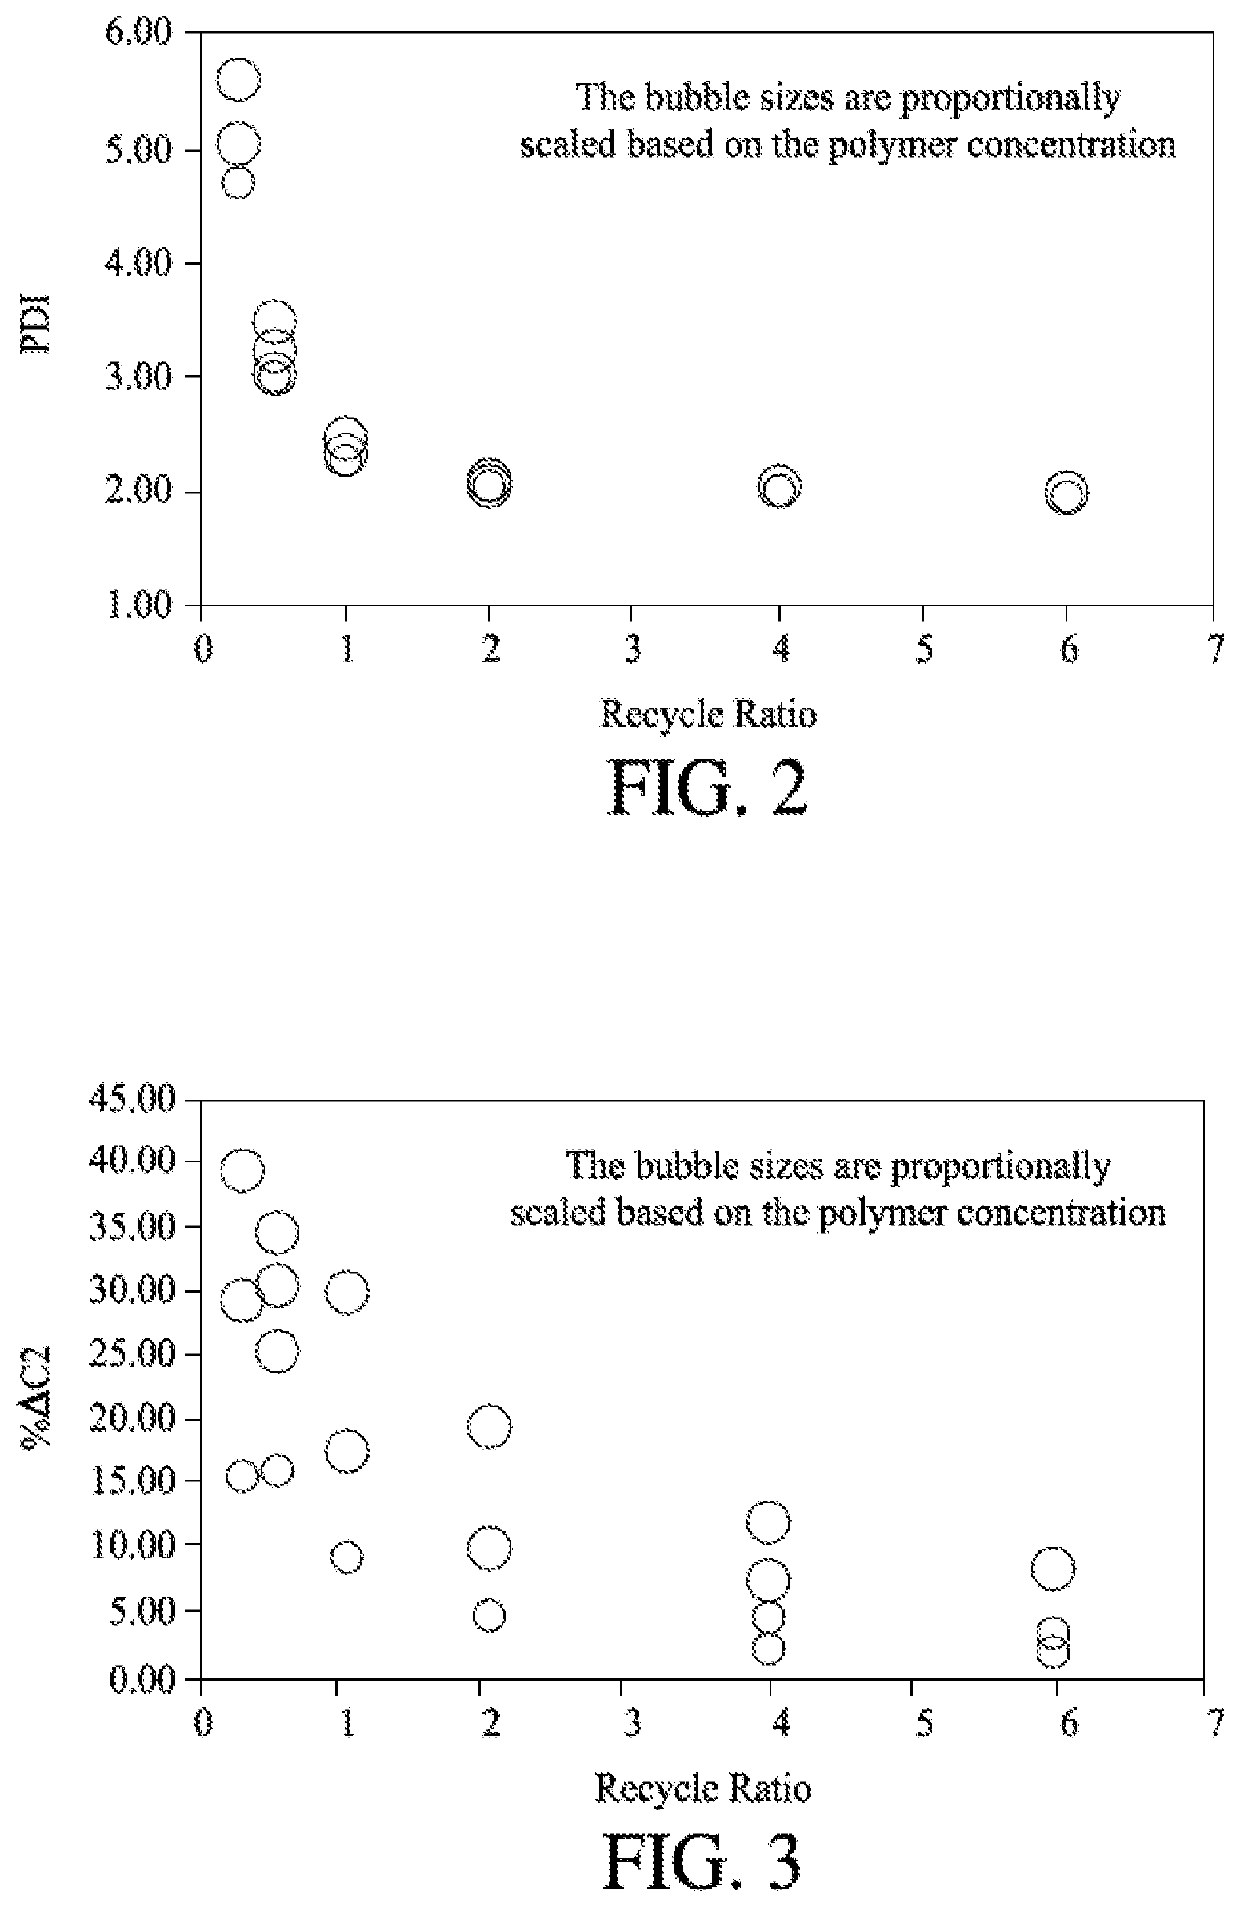 Controlling Molecular Weight Distribution and Chemical Composition Distribution of a Polyolefin Product